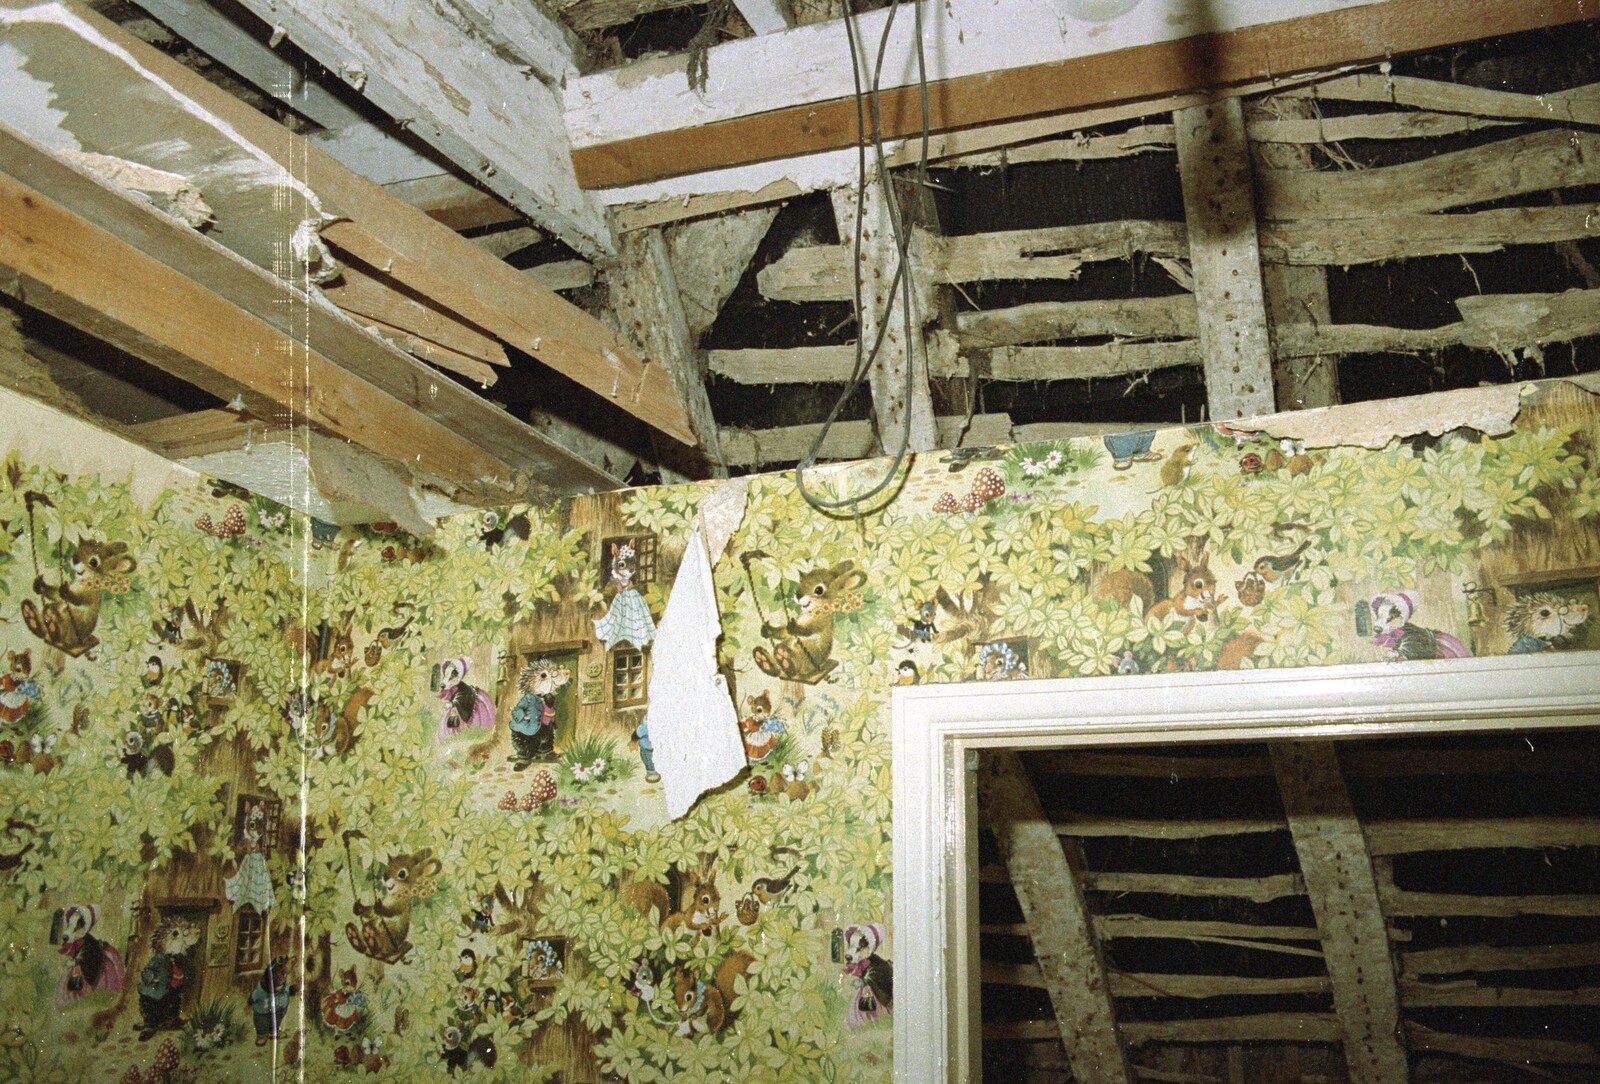 The old child's bedroom wallpaper from Hale-Bopp and Bedroom Demolition, Brome, Suffolk - 10th May 1997